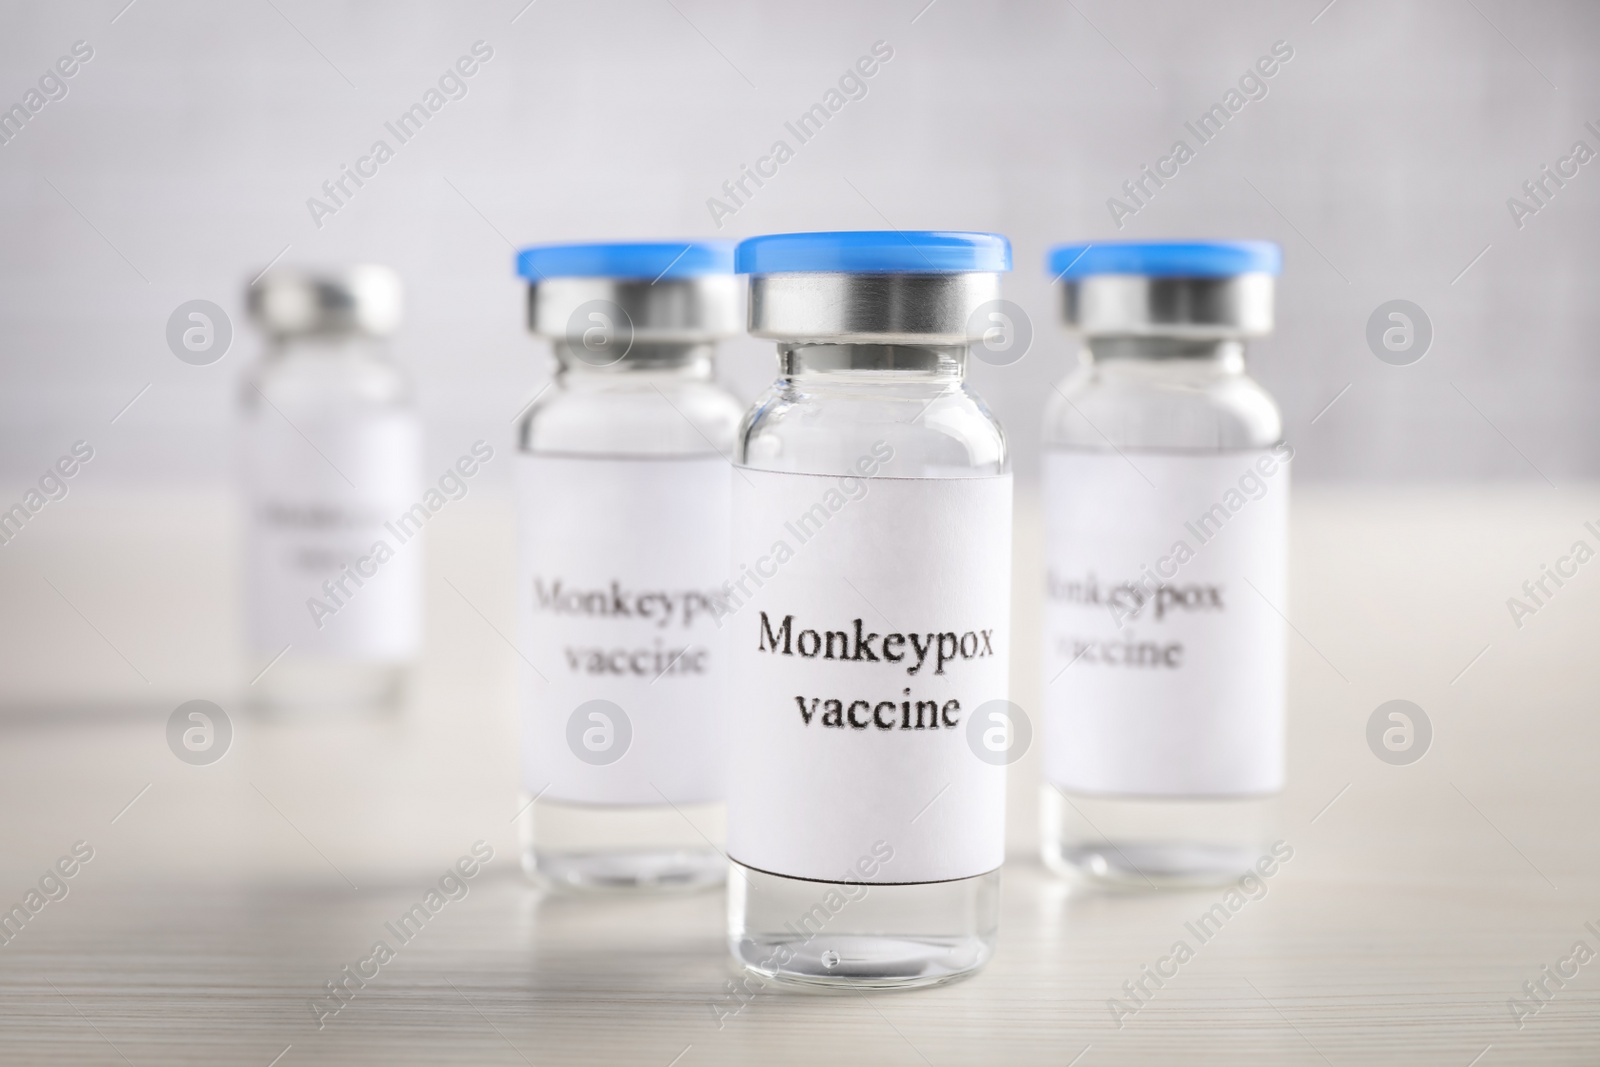 Photo of Monkeypox vaccine in glass vials on white wooden table